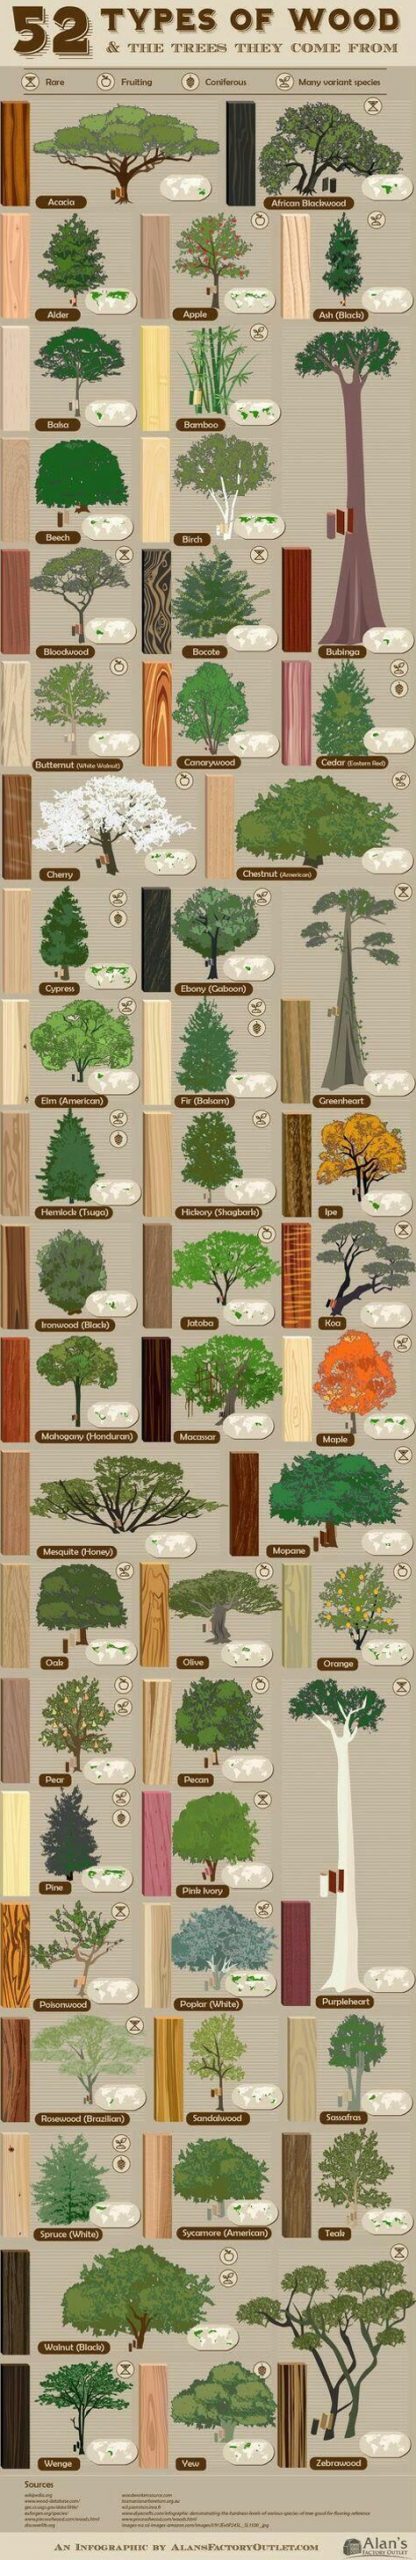 52 TYPES OF WOOD & THE THREES THEY COME FROM #BEST INFOGRAPHICS #INFOGRAPHIC S